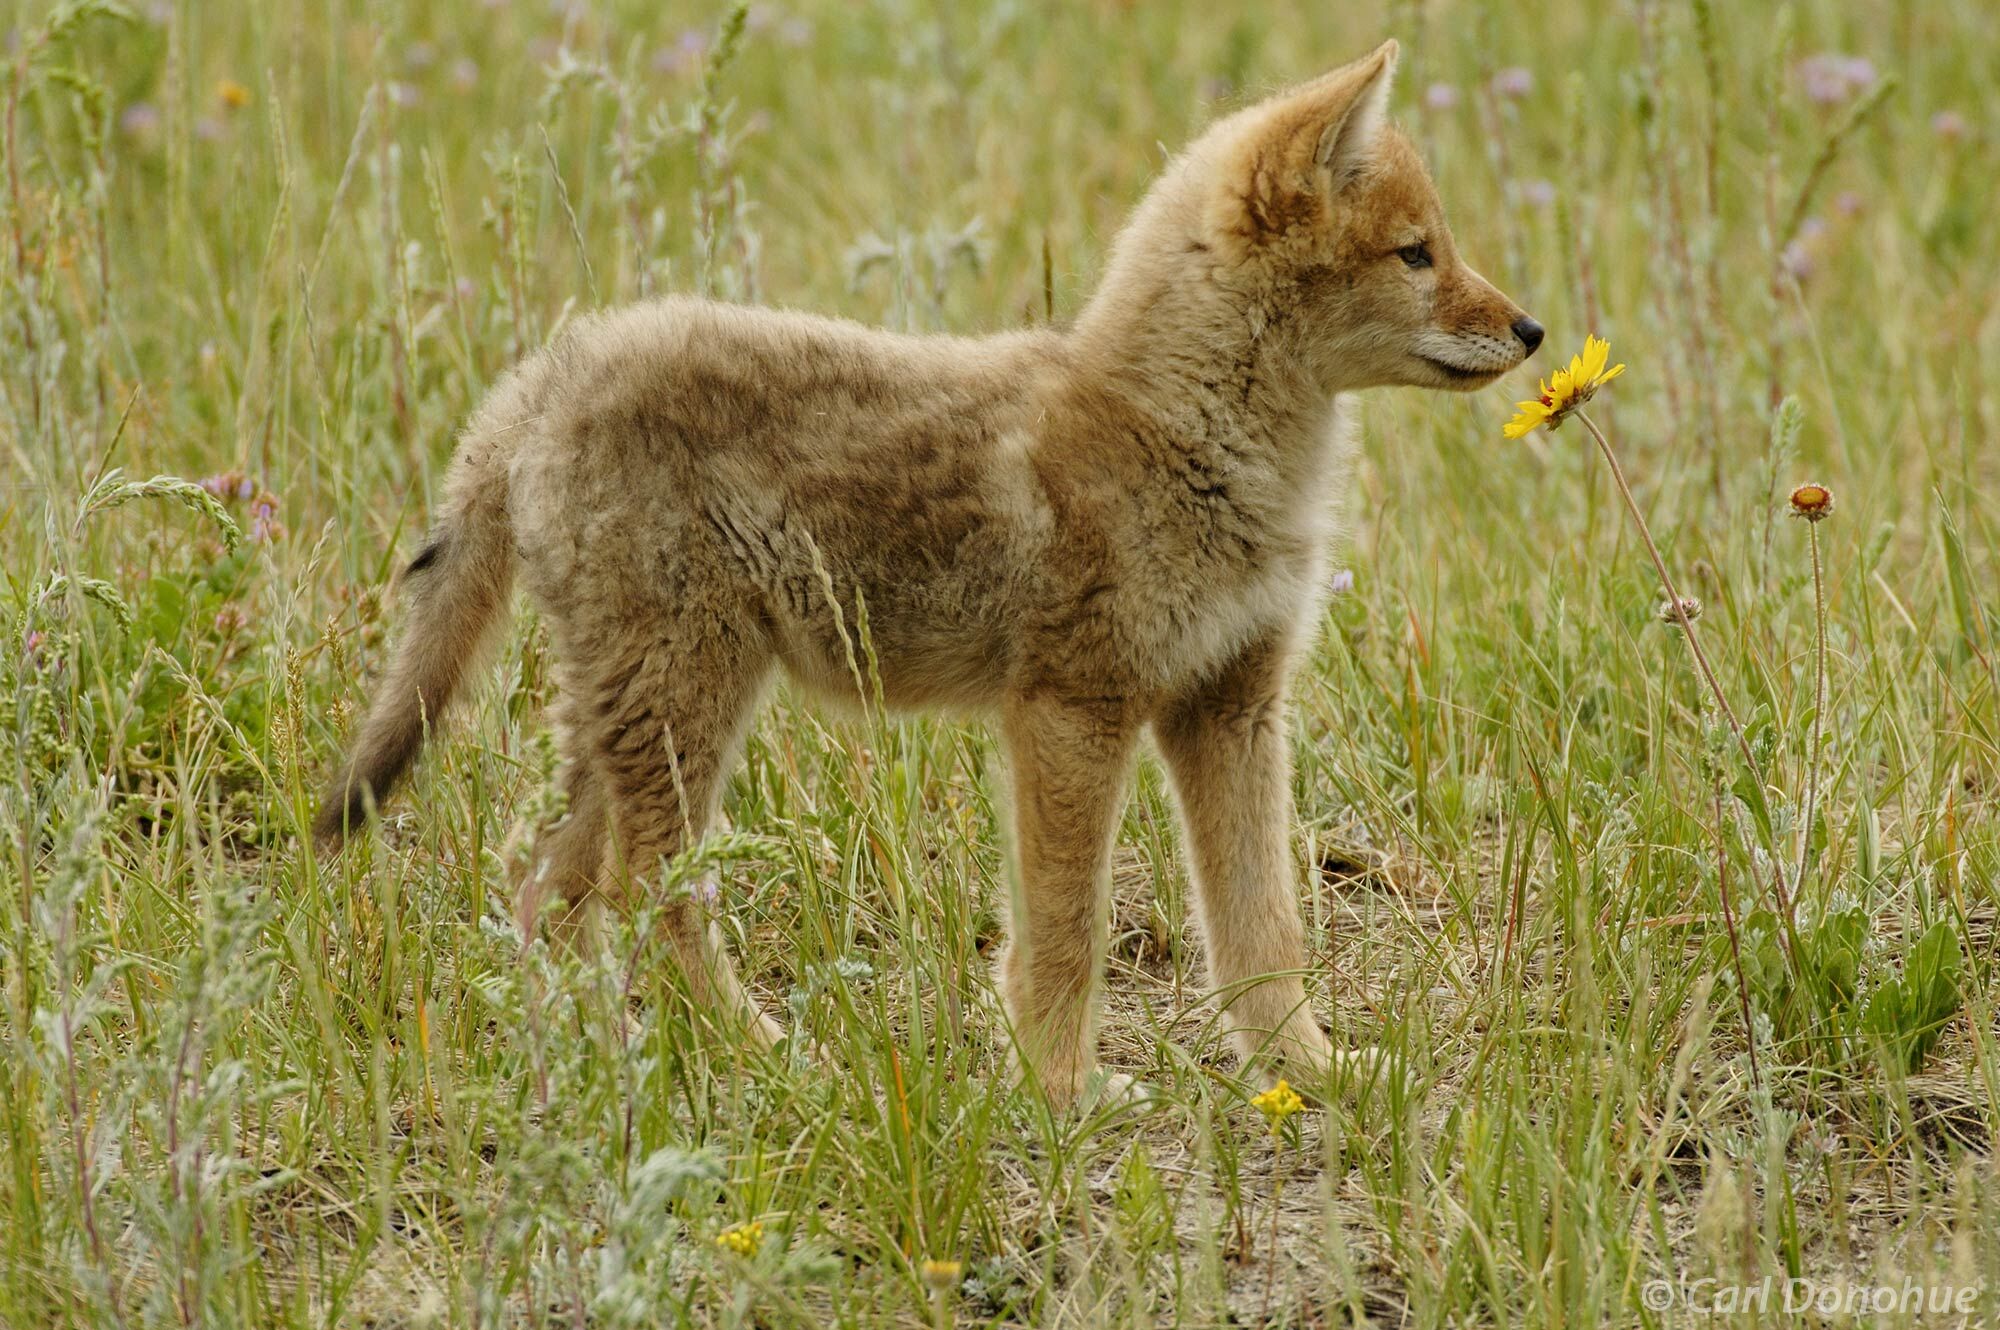 Coyote pup, yawning, beside yellow daisies, Jasper National Park, Canada.